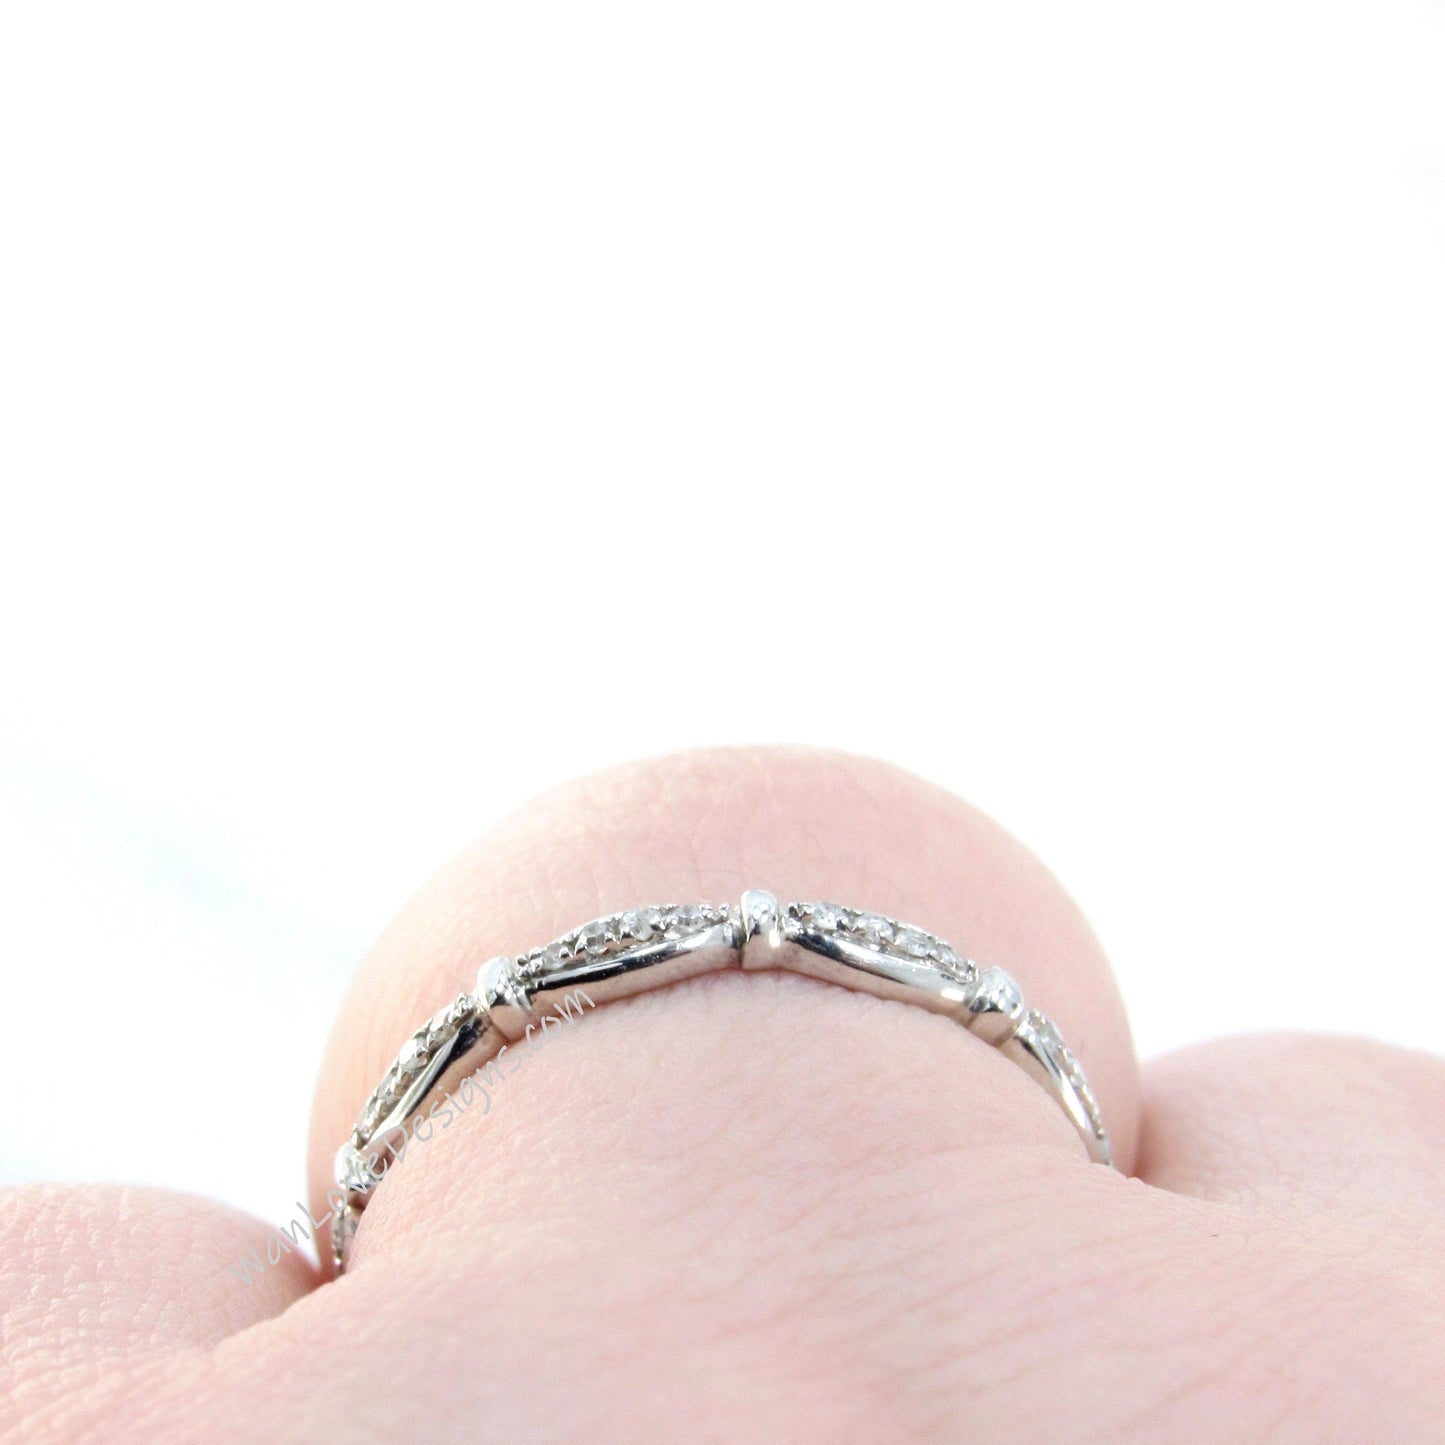 Sample Sale Ready to ship-Diamond Scalloped leaf Half Eternity Stackable Wedding Band Ring-Silver Rhodium-Engagement-Anniversary Gift-Pinky Wan Love Designs